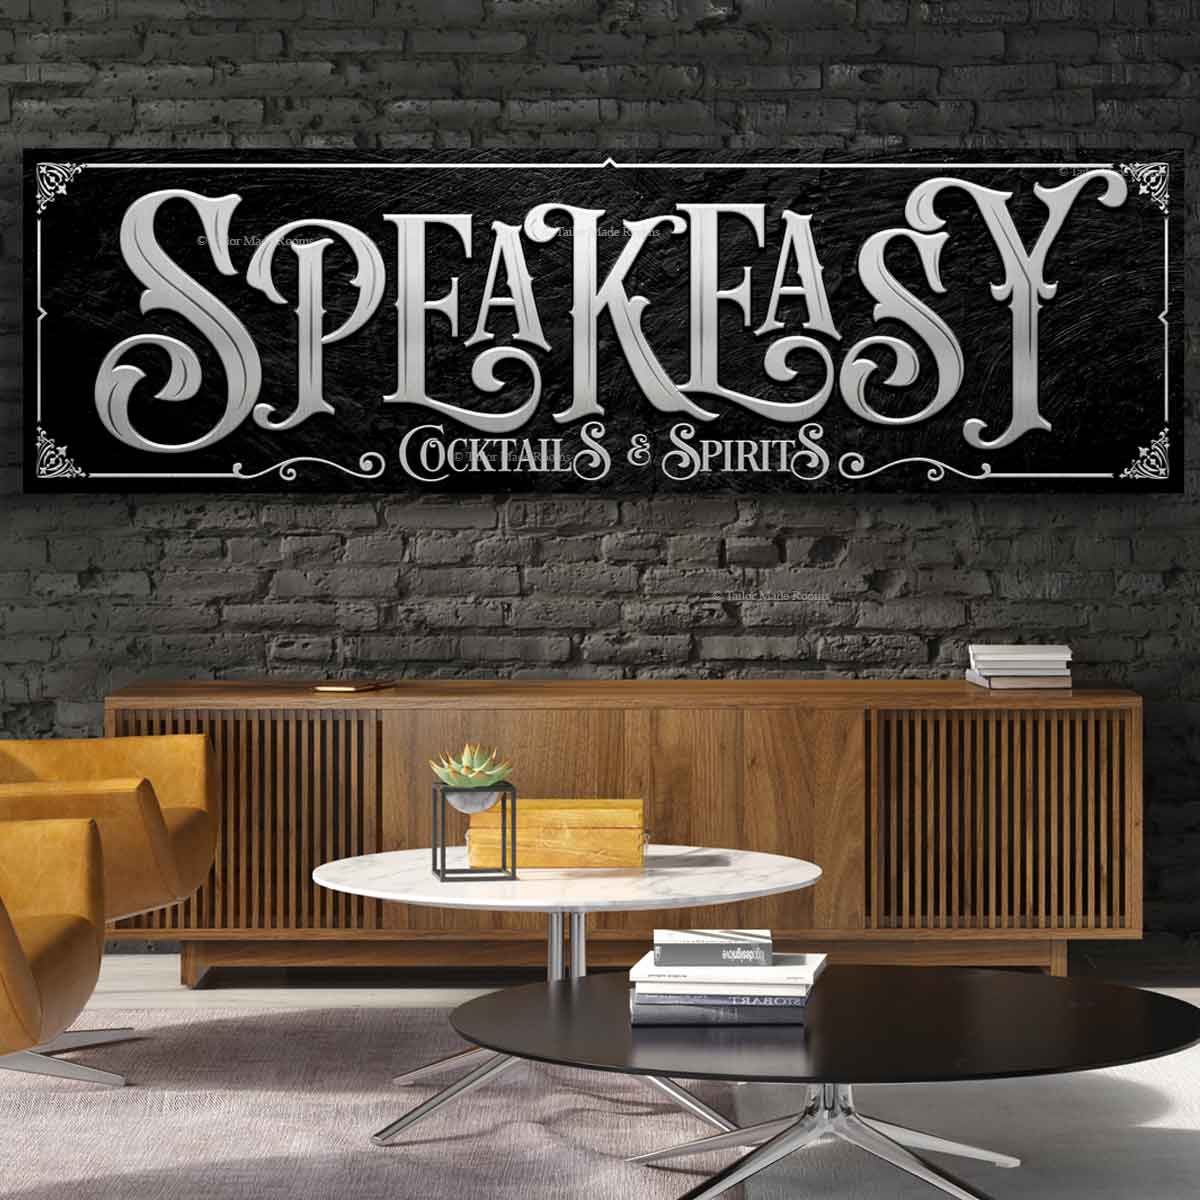 Speakeasy Sign in Silver Text that looks like metal, [speakeasy Cocktails and spirits]